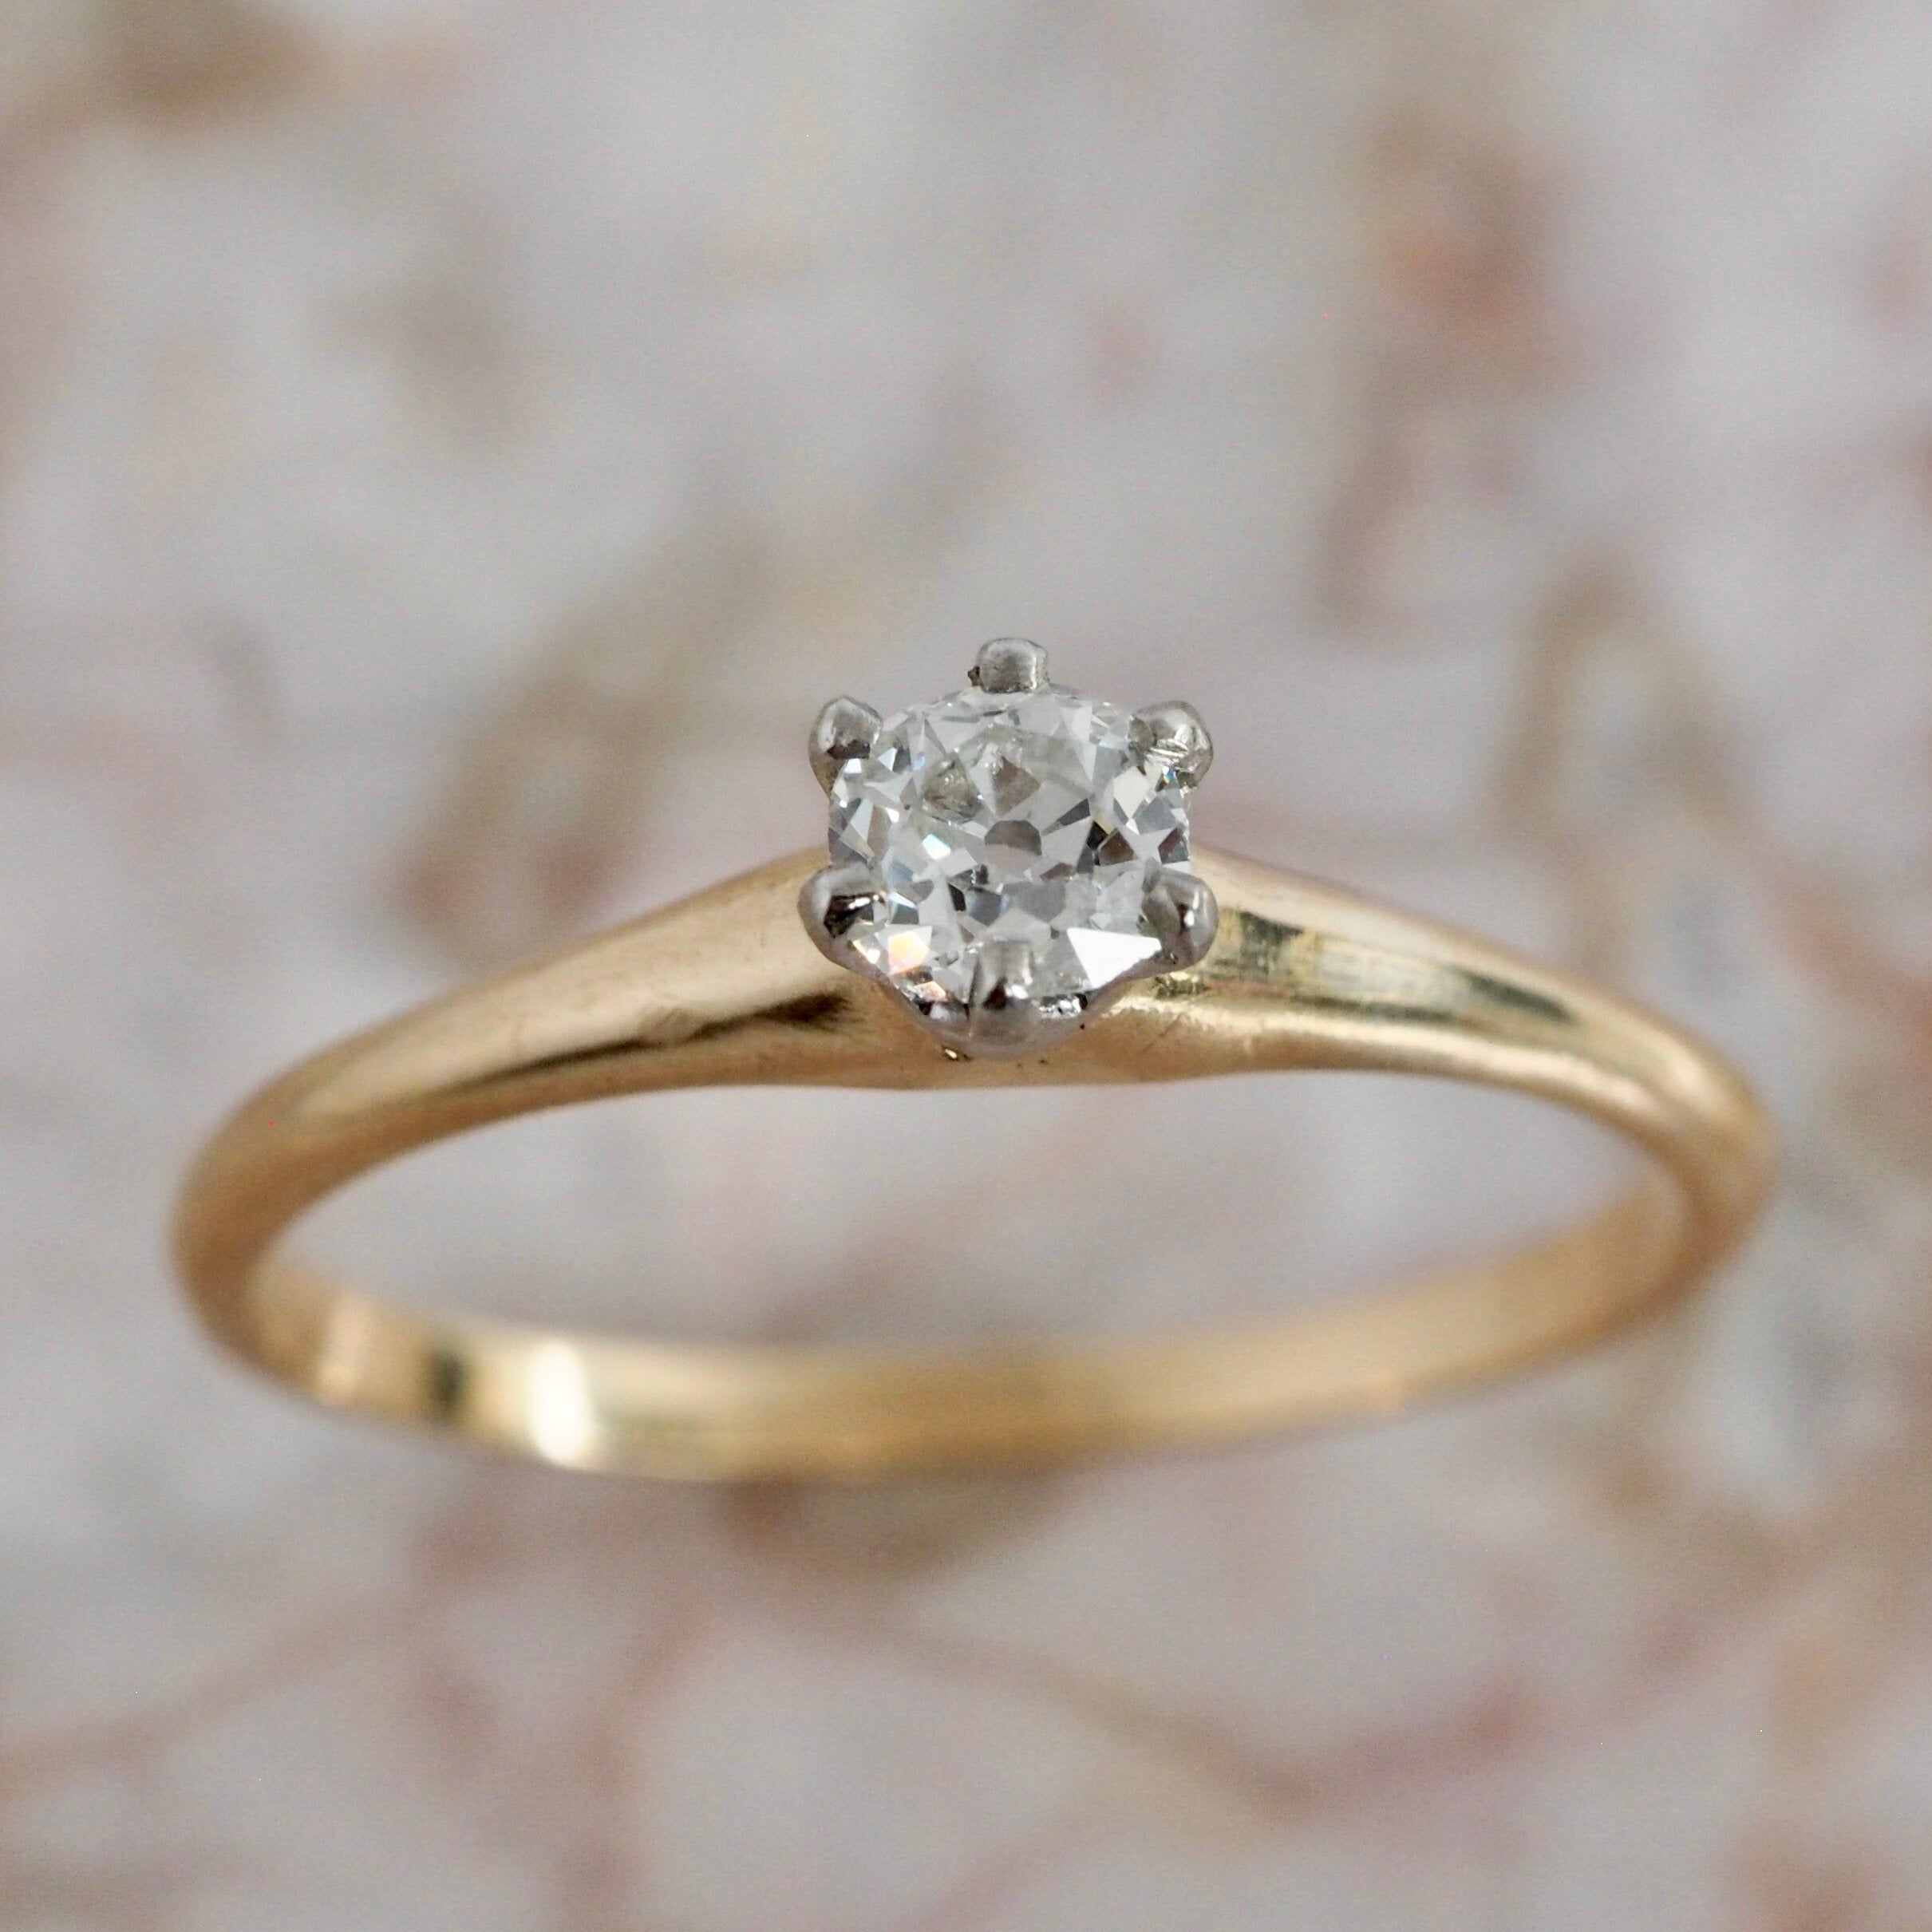 Antique 14k Gold Old Mine Cut Diamond Solitaire Ring